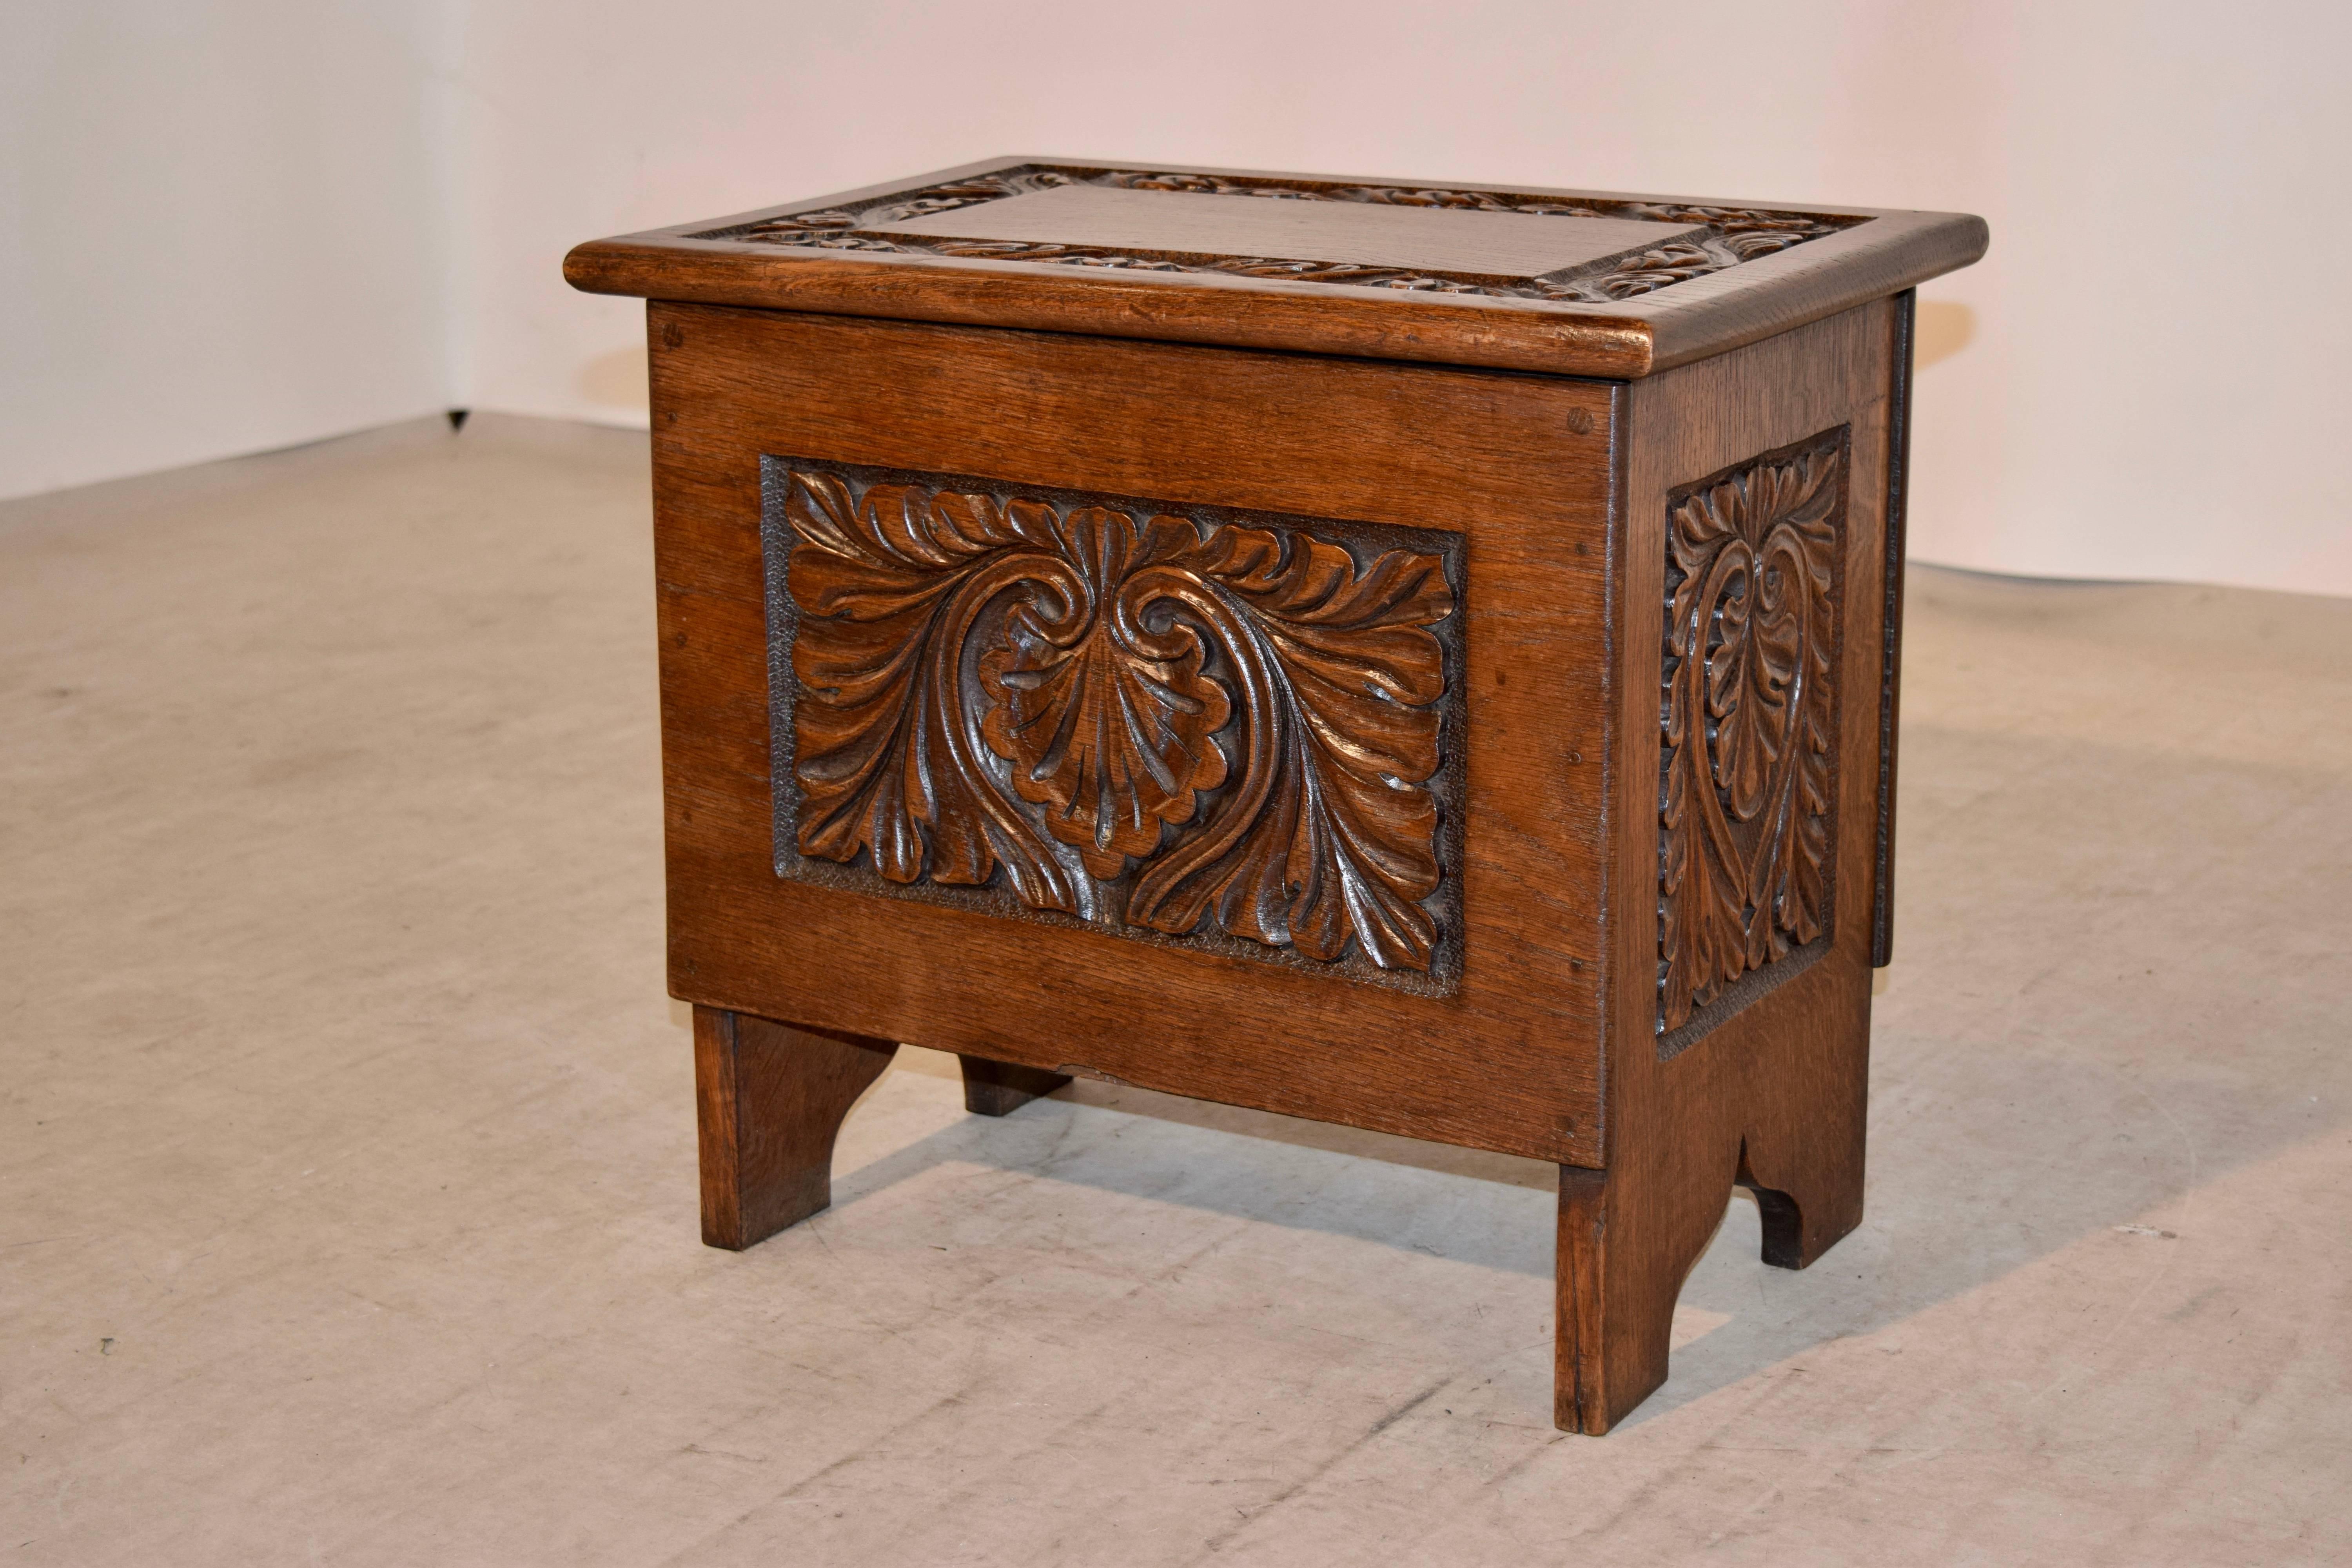 19th century English oak box with hand-carved panels on three sides. The top has a carved banded border, which lifts to reveal a deep storage compartment.